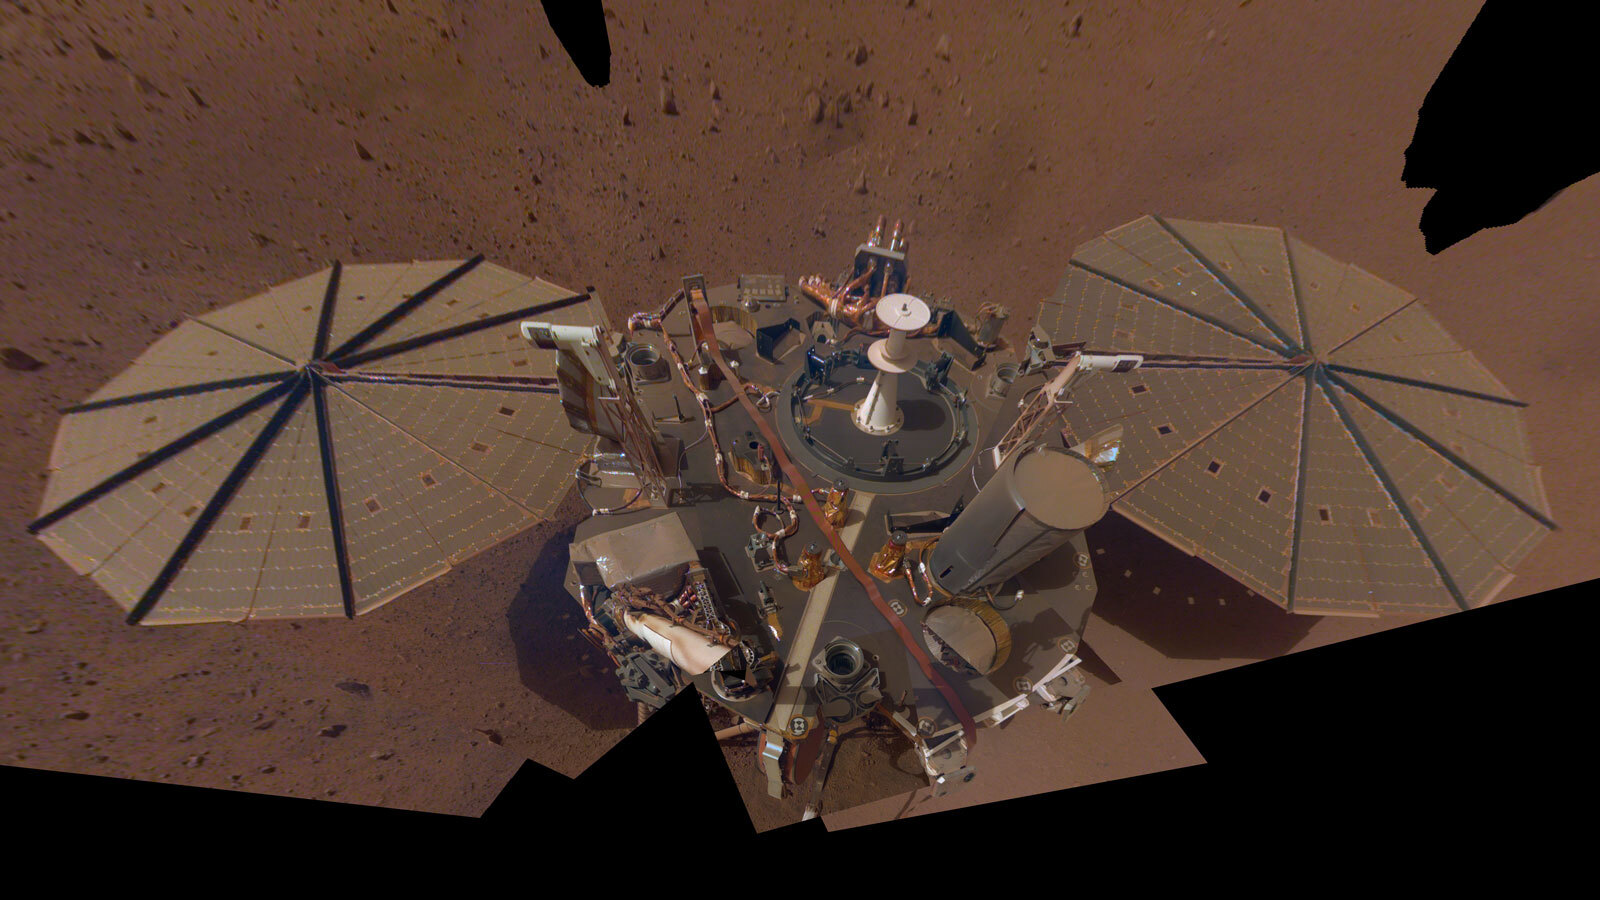 This is NASA InSight's second full selfie on Mars. Since taking its first selfie, the lander has removed its heat probe and seismometer from its deck, placing them on the Martian surface; a thin coating of dust now covers the spacecraft as well.